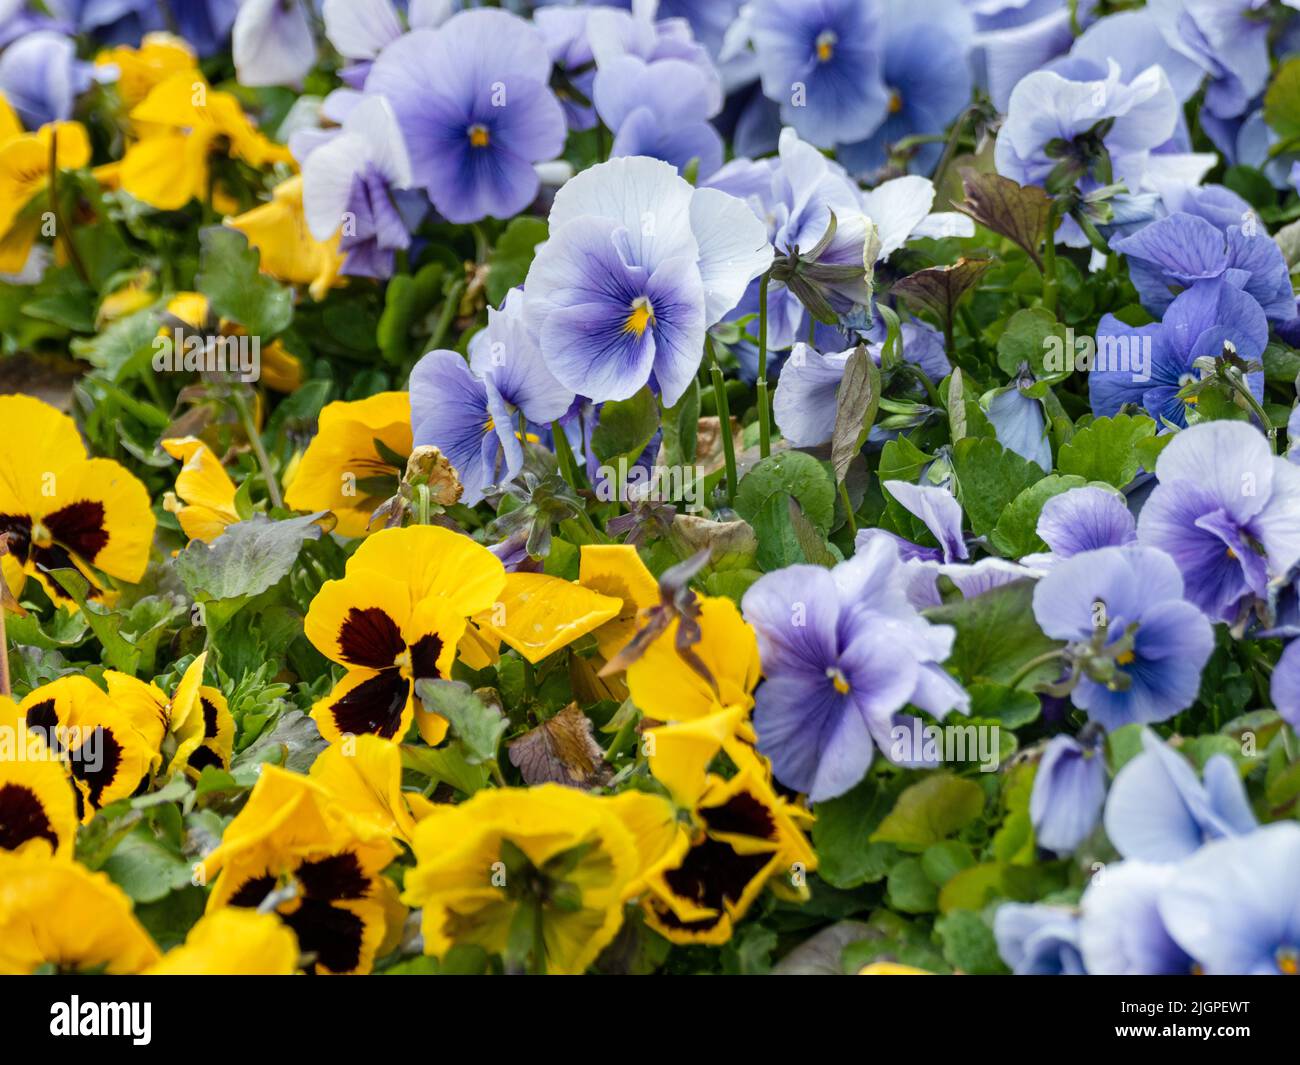 Vibrant yellow and blue Viola Cornuta pansies flowers close-up, floral background with blooming colorful pansy flowers with green leaves Stock Photo